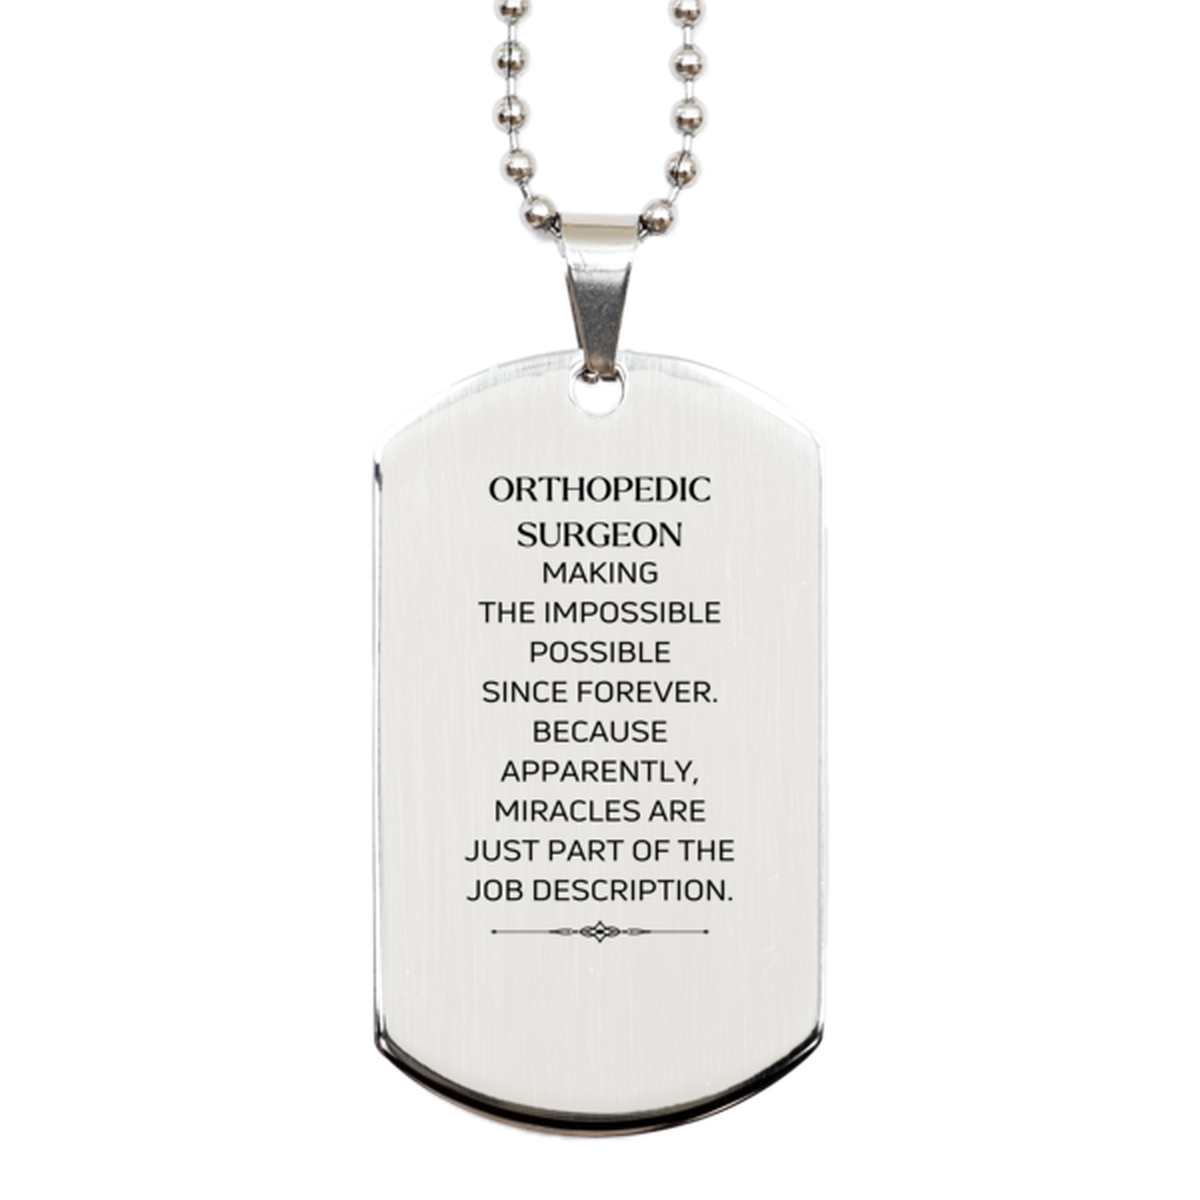 Funny Orthopedic Surgeon Gifts, Miracles are just part of the job description, Inspirational Birthday Silver Dog Tag For Orthopedic Surgeon, Men, Women, Coworkers, Friends, Boss